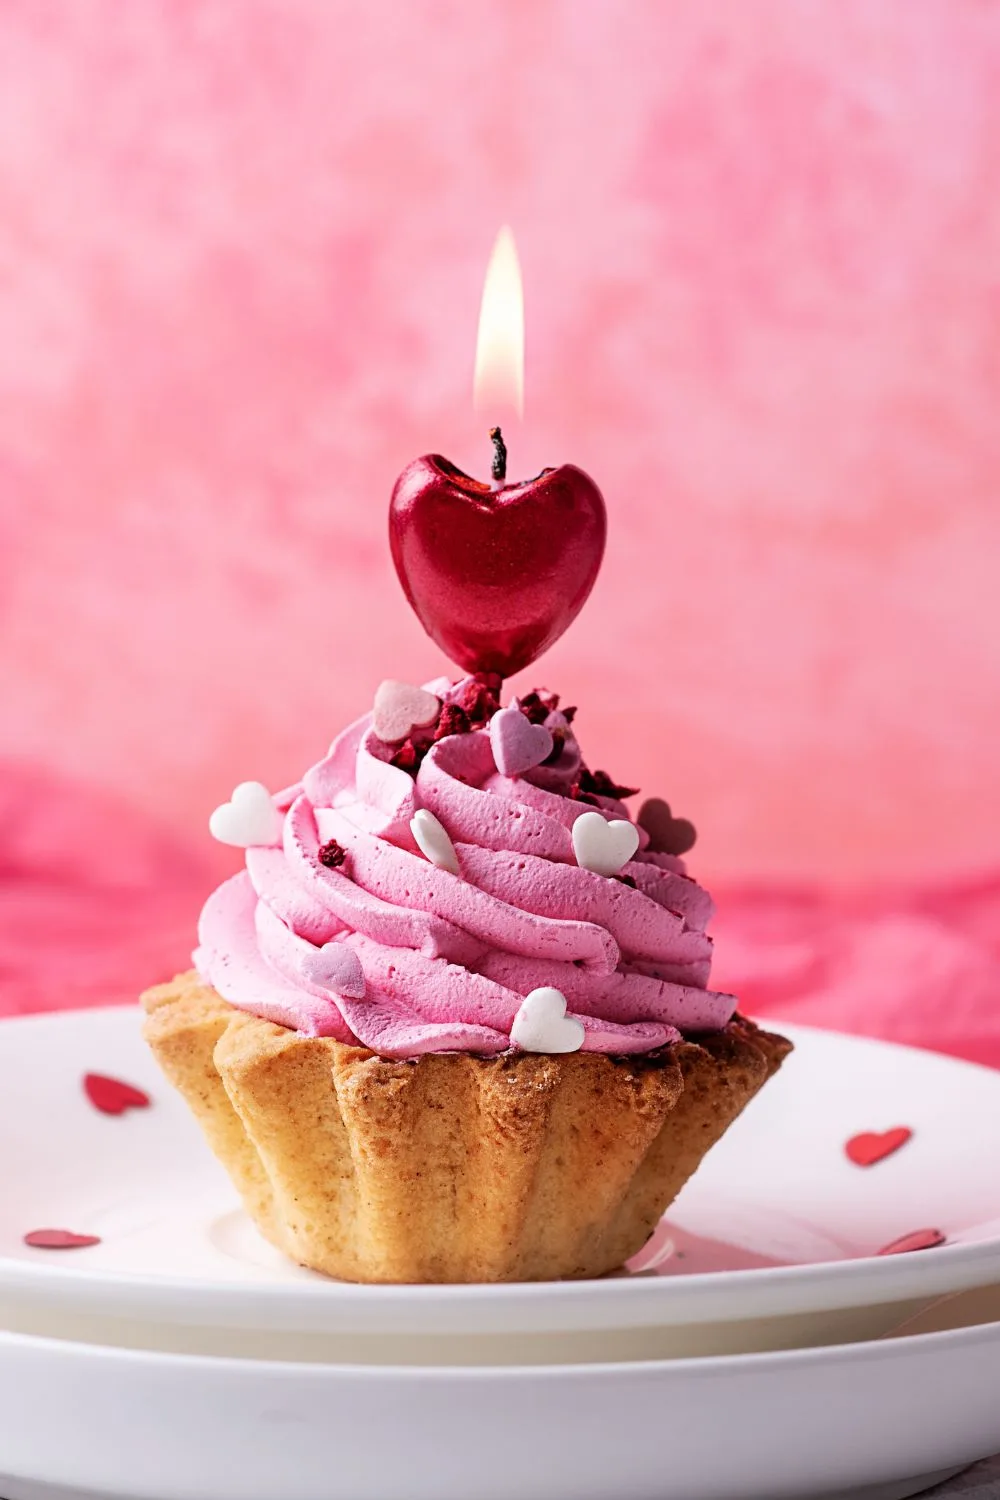 A Valentine's Day themed tart with pink frosting. There is a lit heart shaped candle on top.